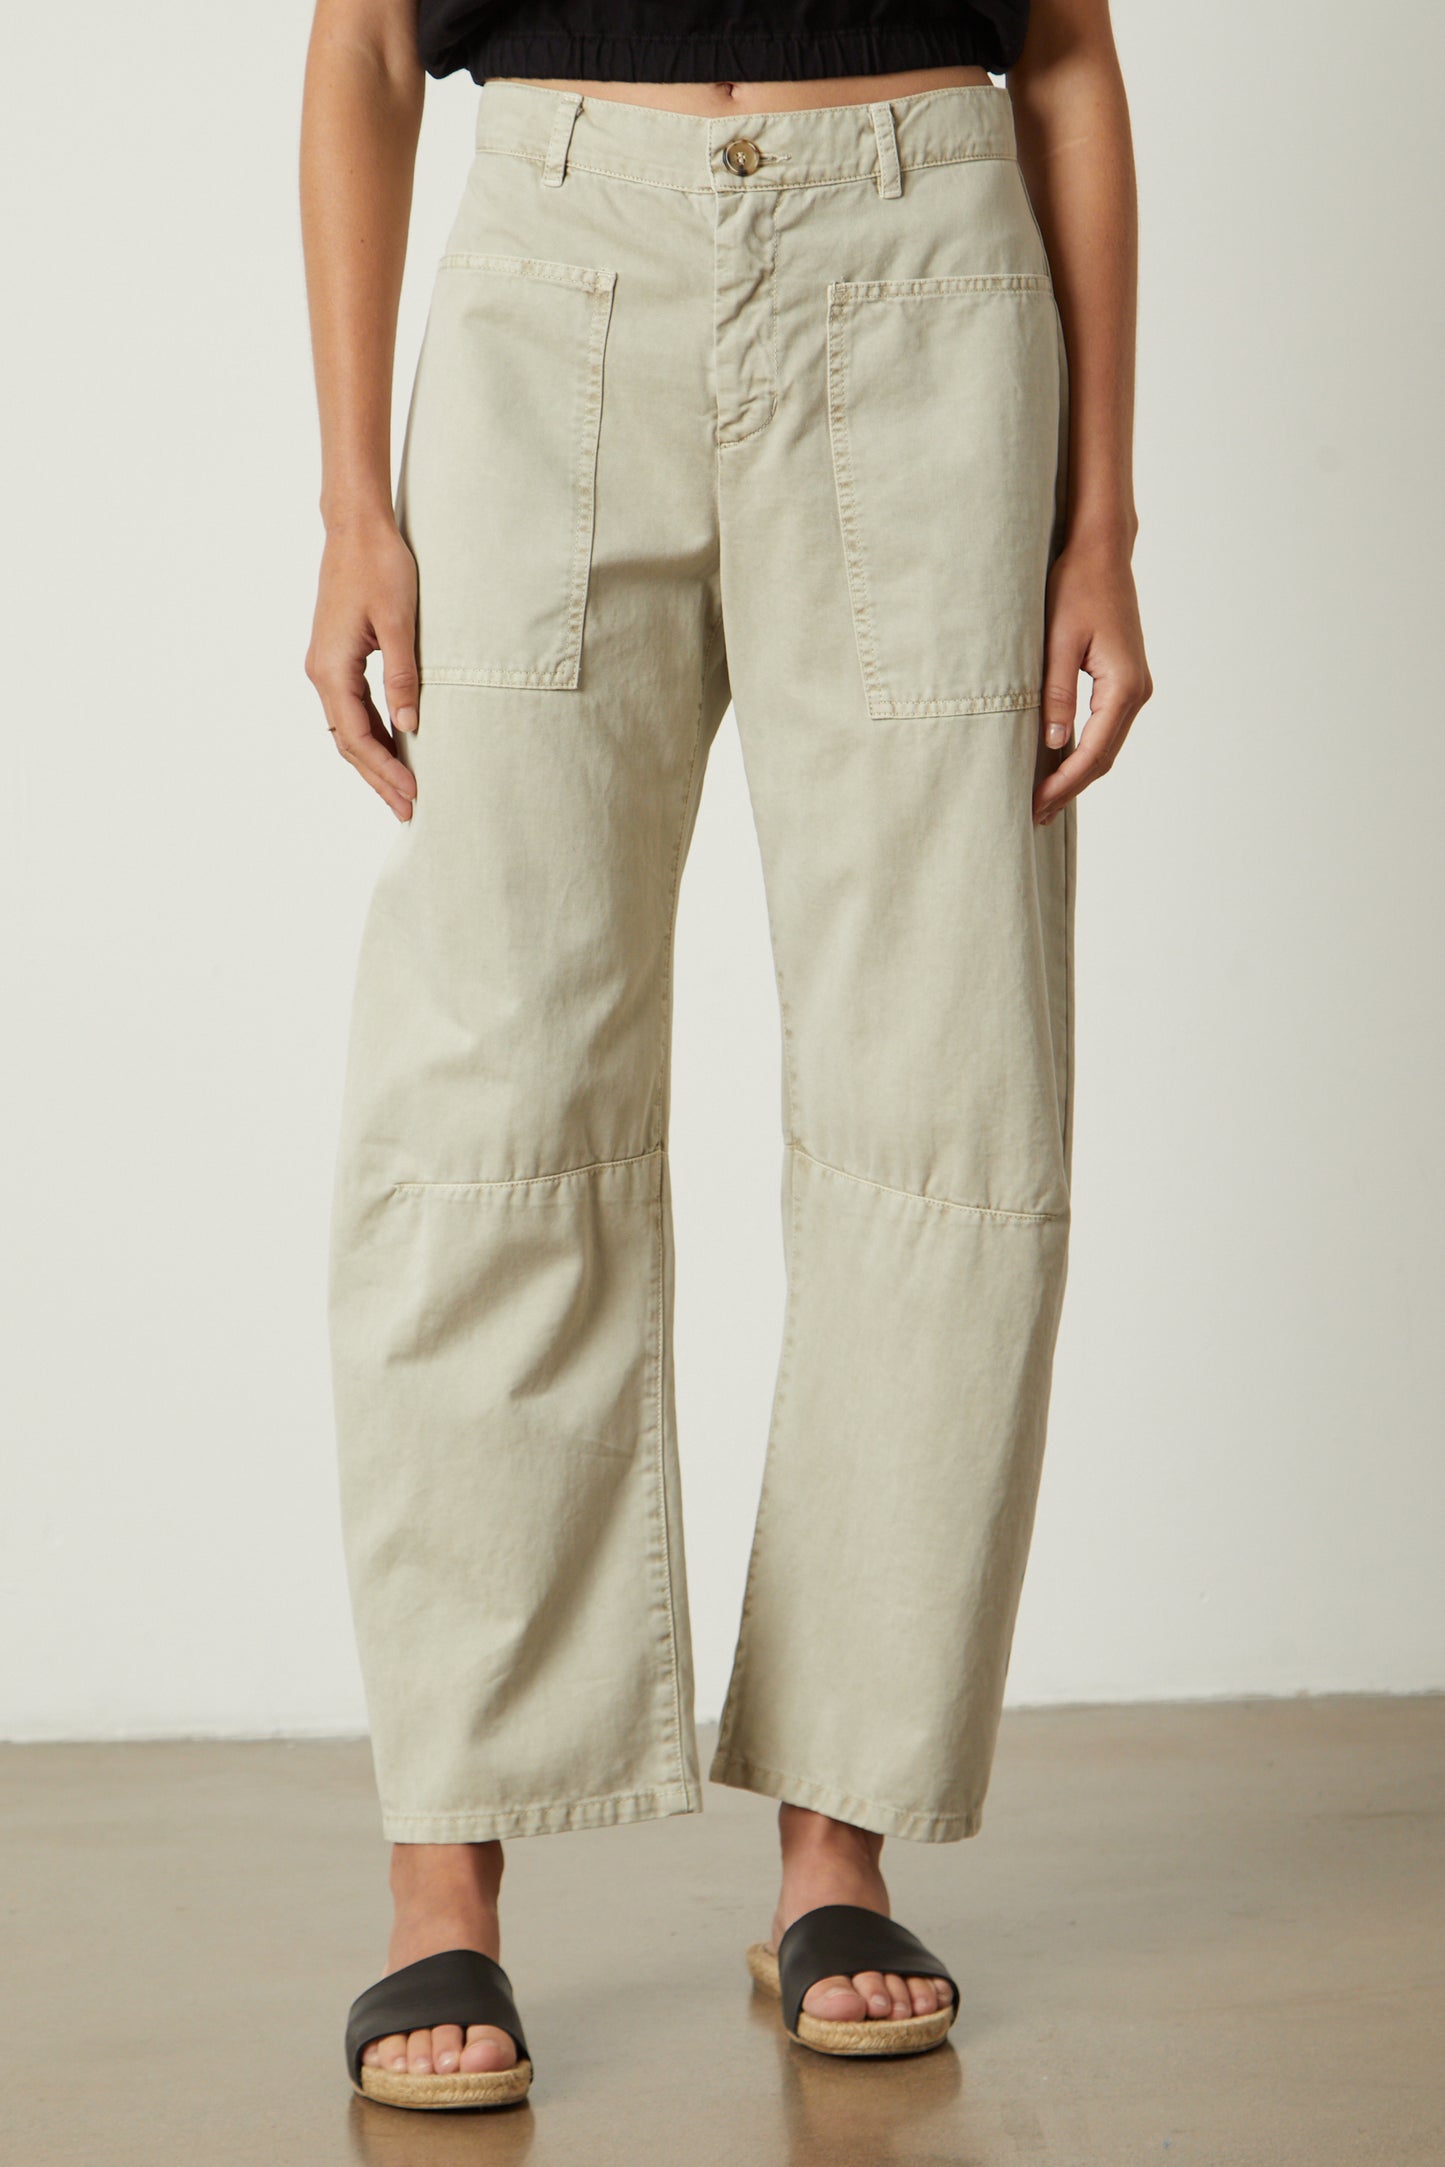 BRYLIE SANDED TWILL PANT IN ANCIENT